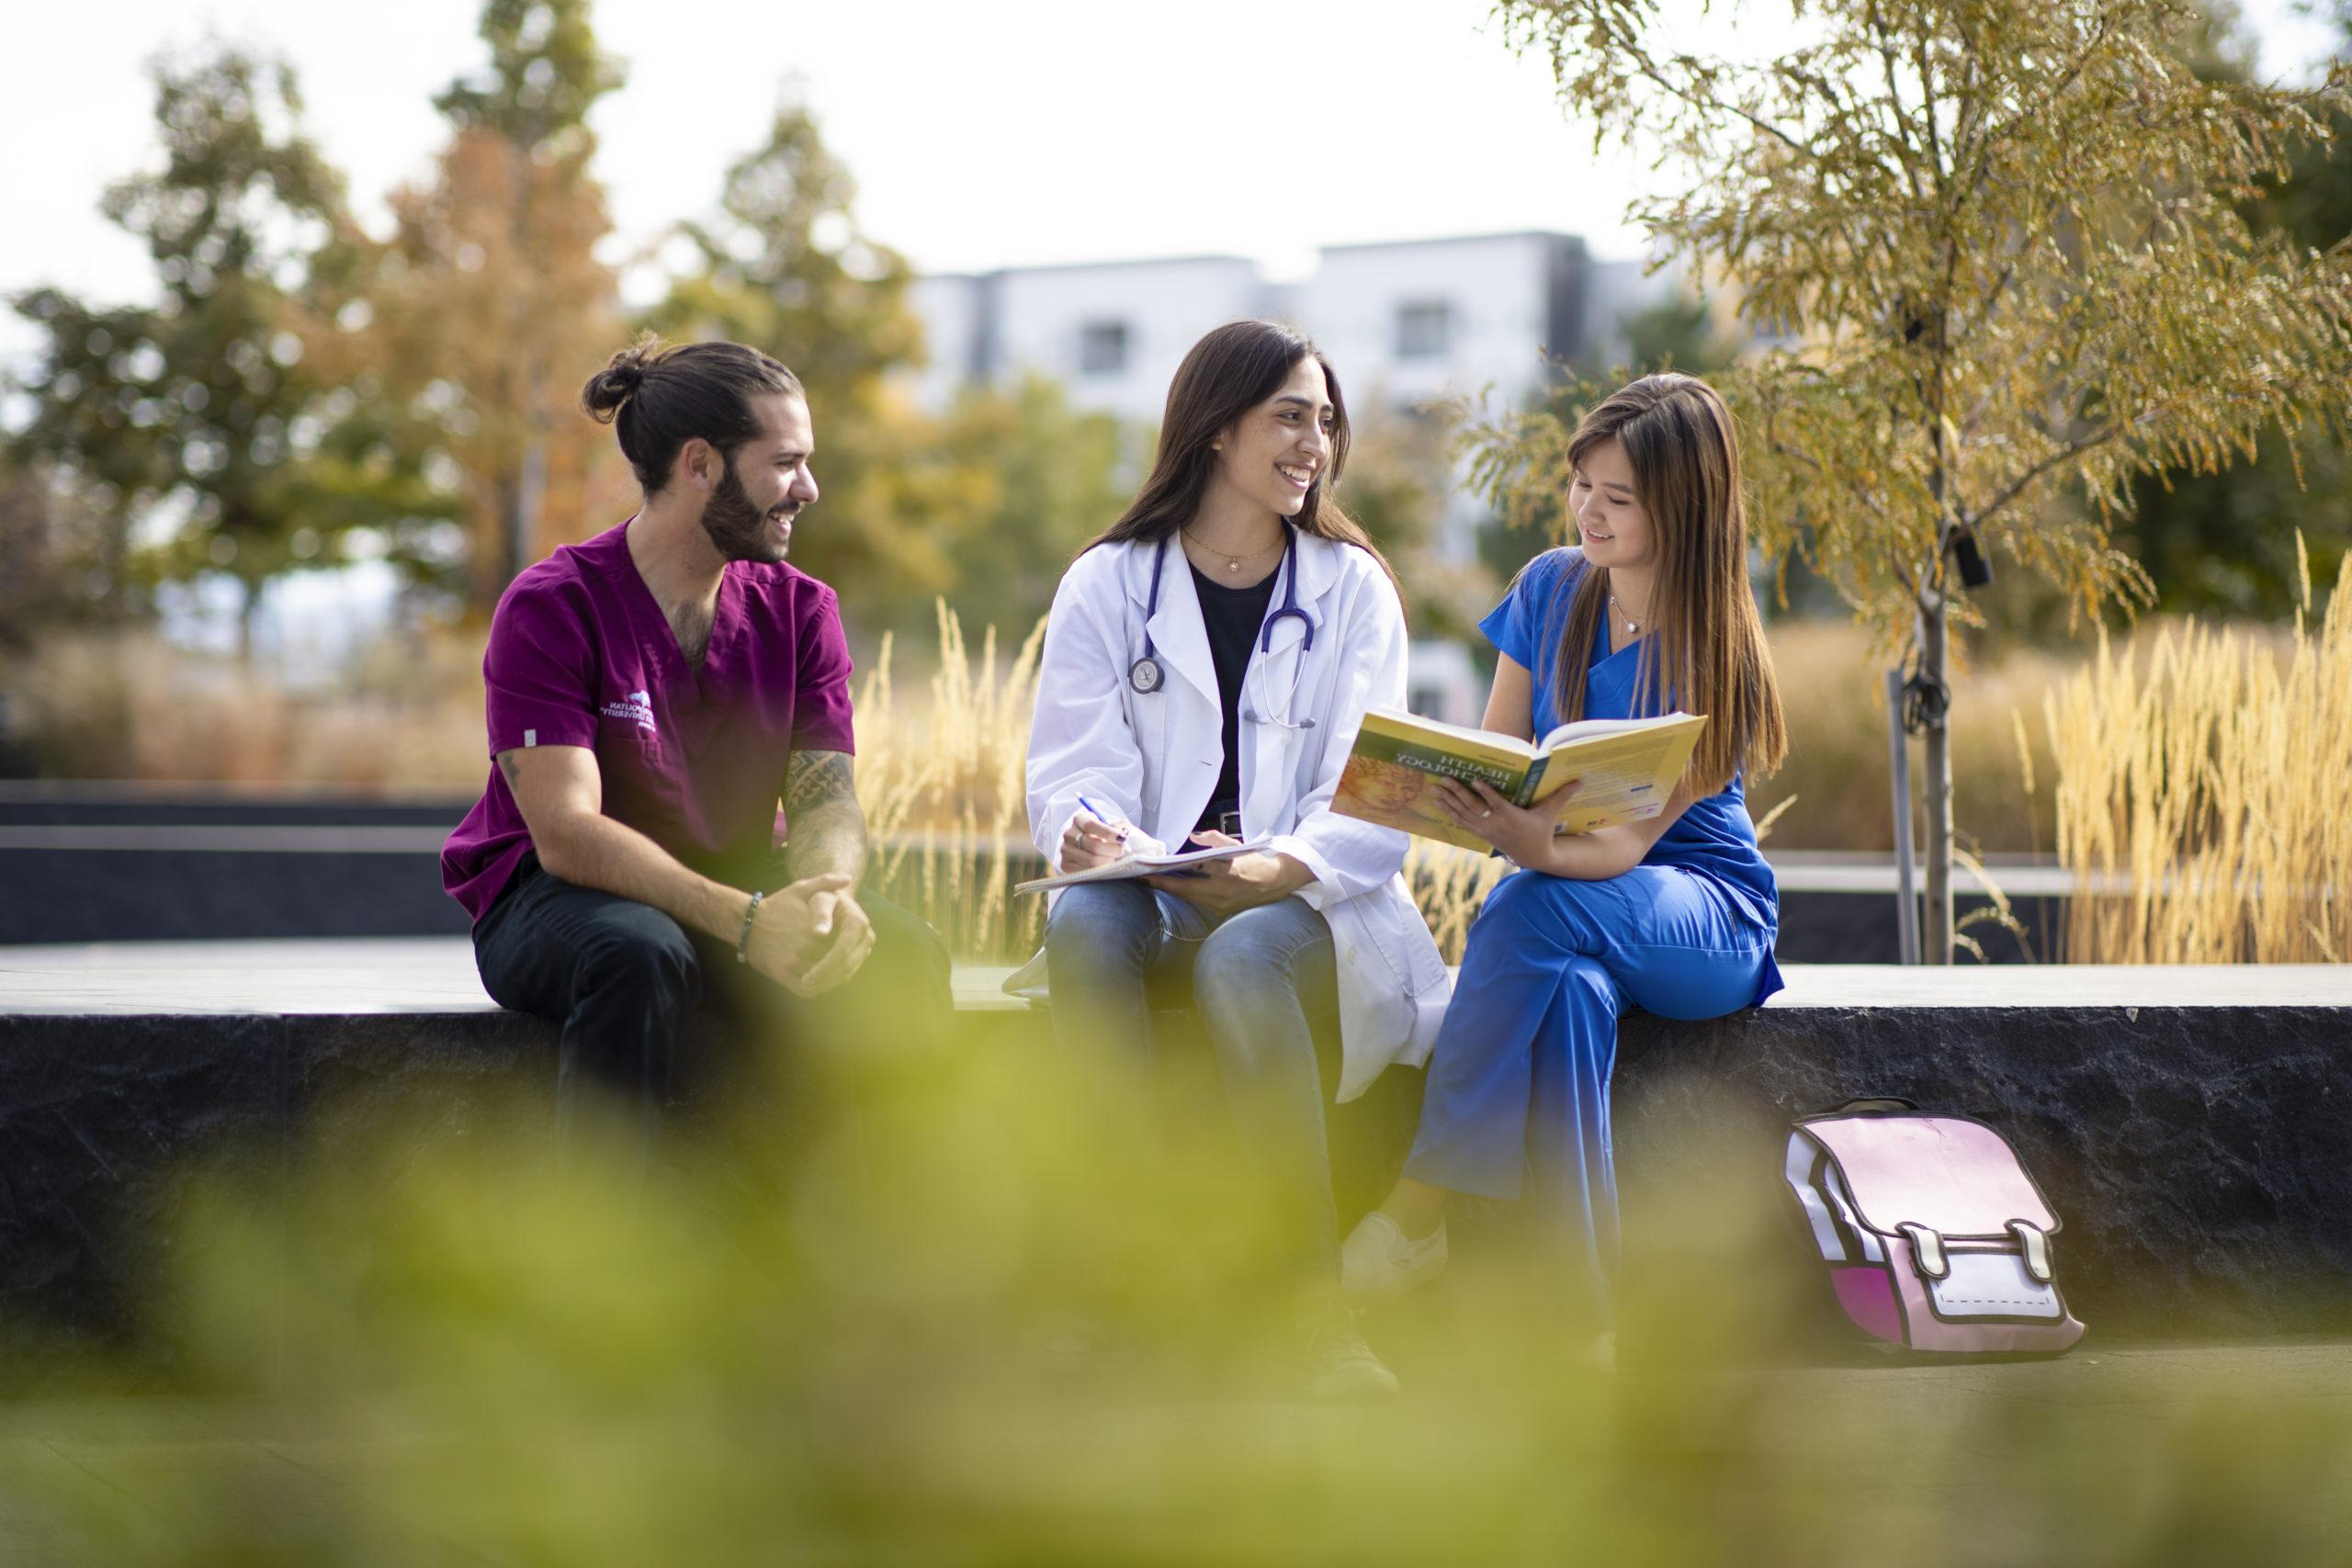 Three healthcare students studying on 密歇根州立大学丹佛's campus.